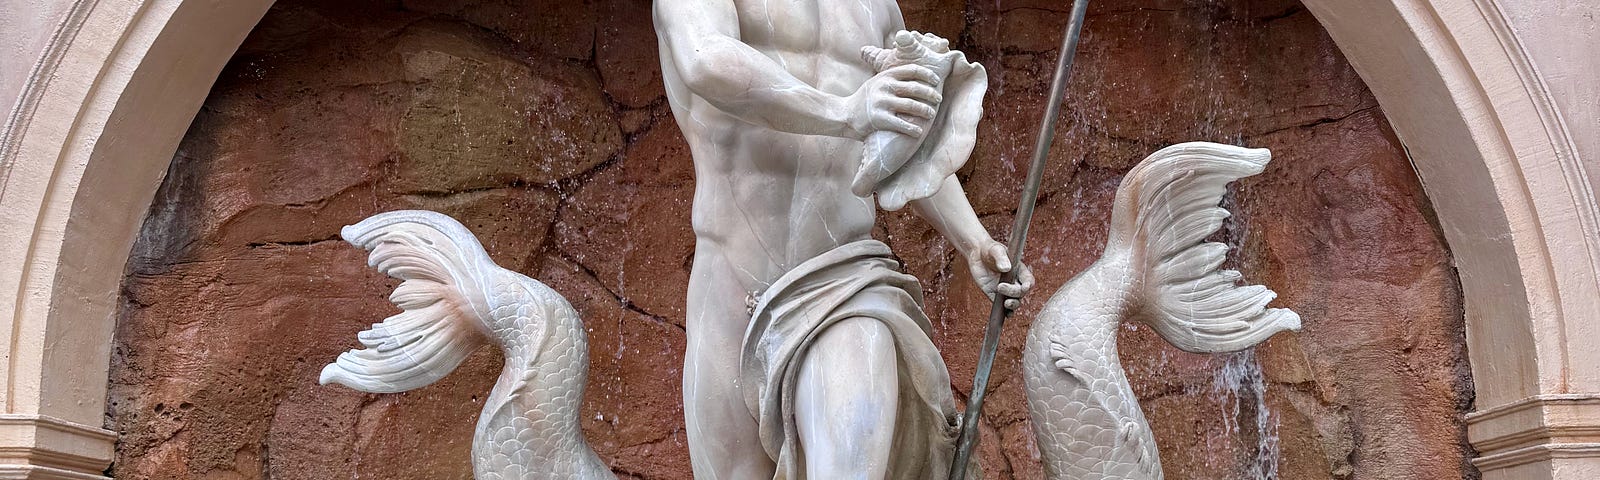 A statue of the roman god Neptune at the entrance to Epcot’s Italian pavilion.